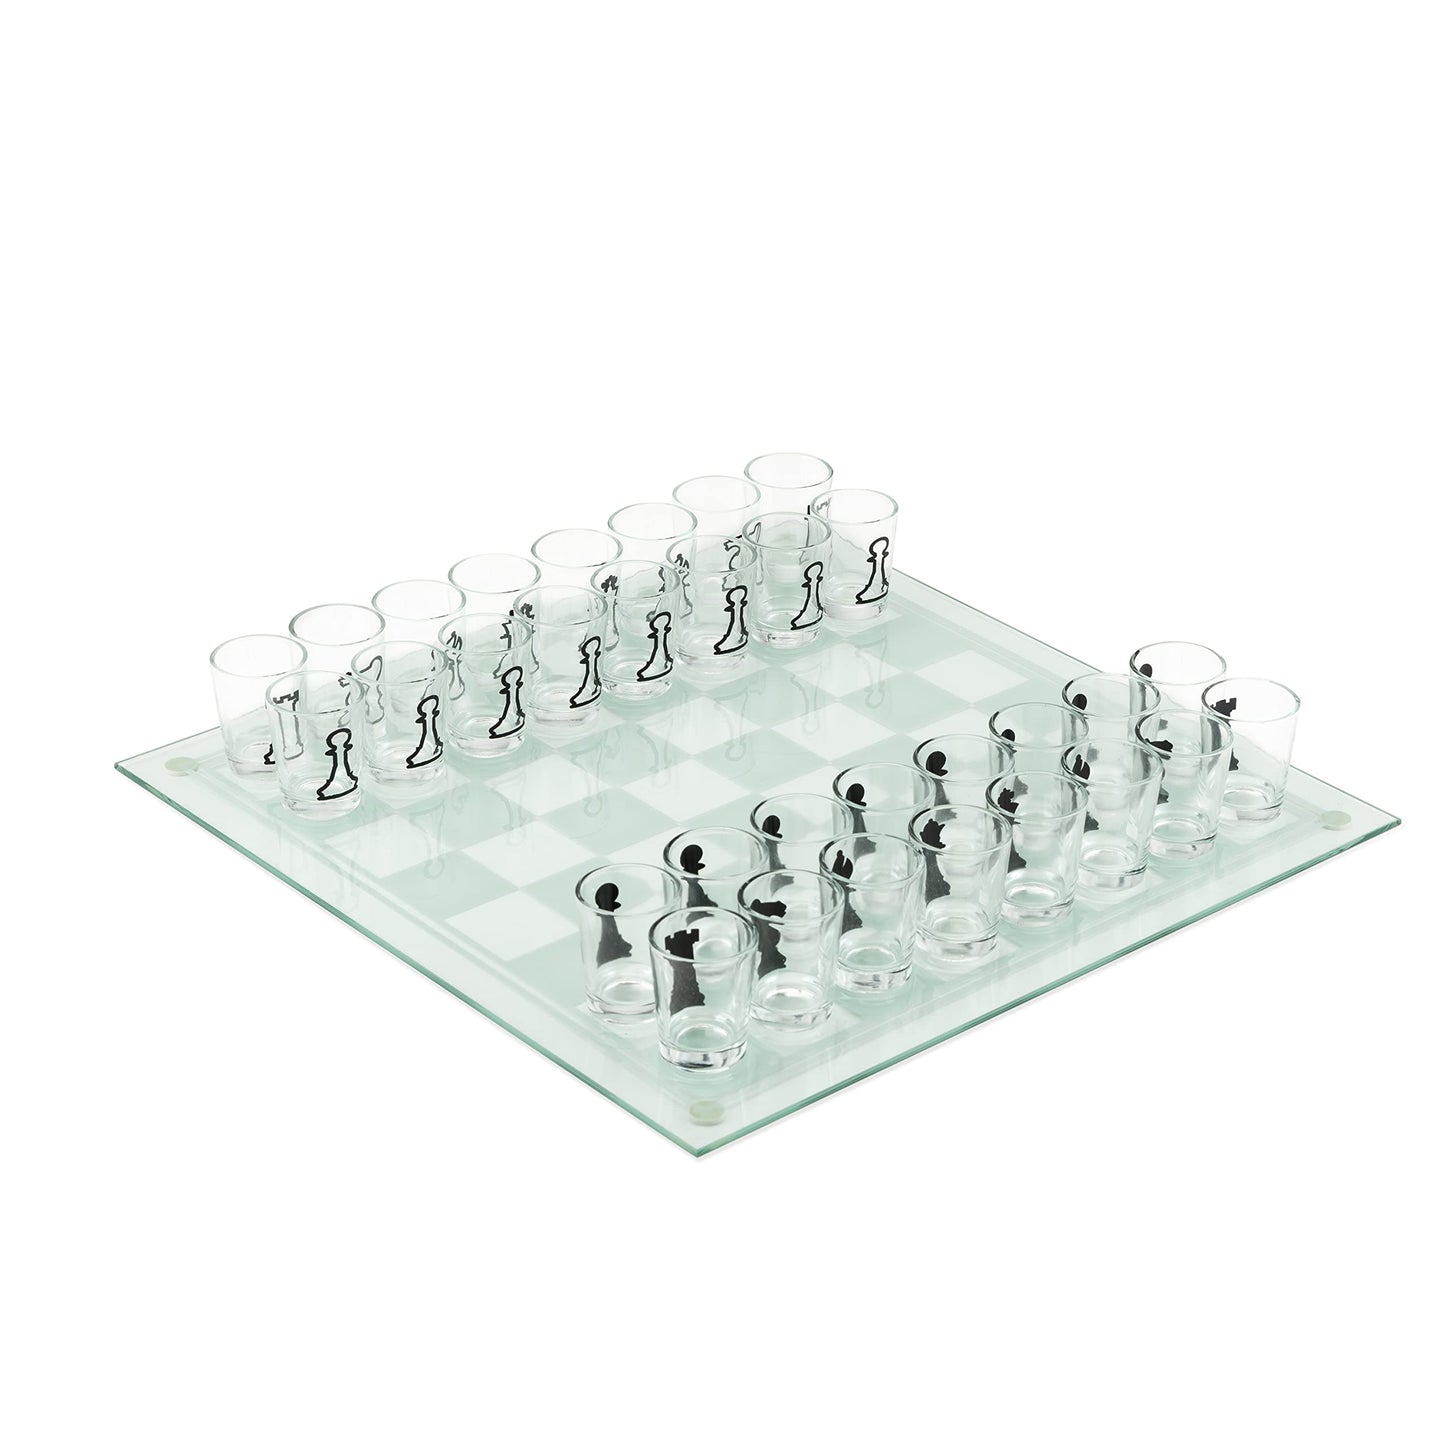 True Shot Glass Chess Game, Chess Board with Shot Glass Chess Pieces, Clear Glass and Frosted Glass, Chess Drinking Game